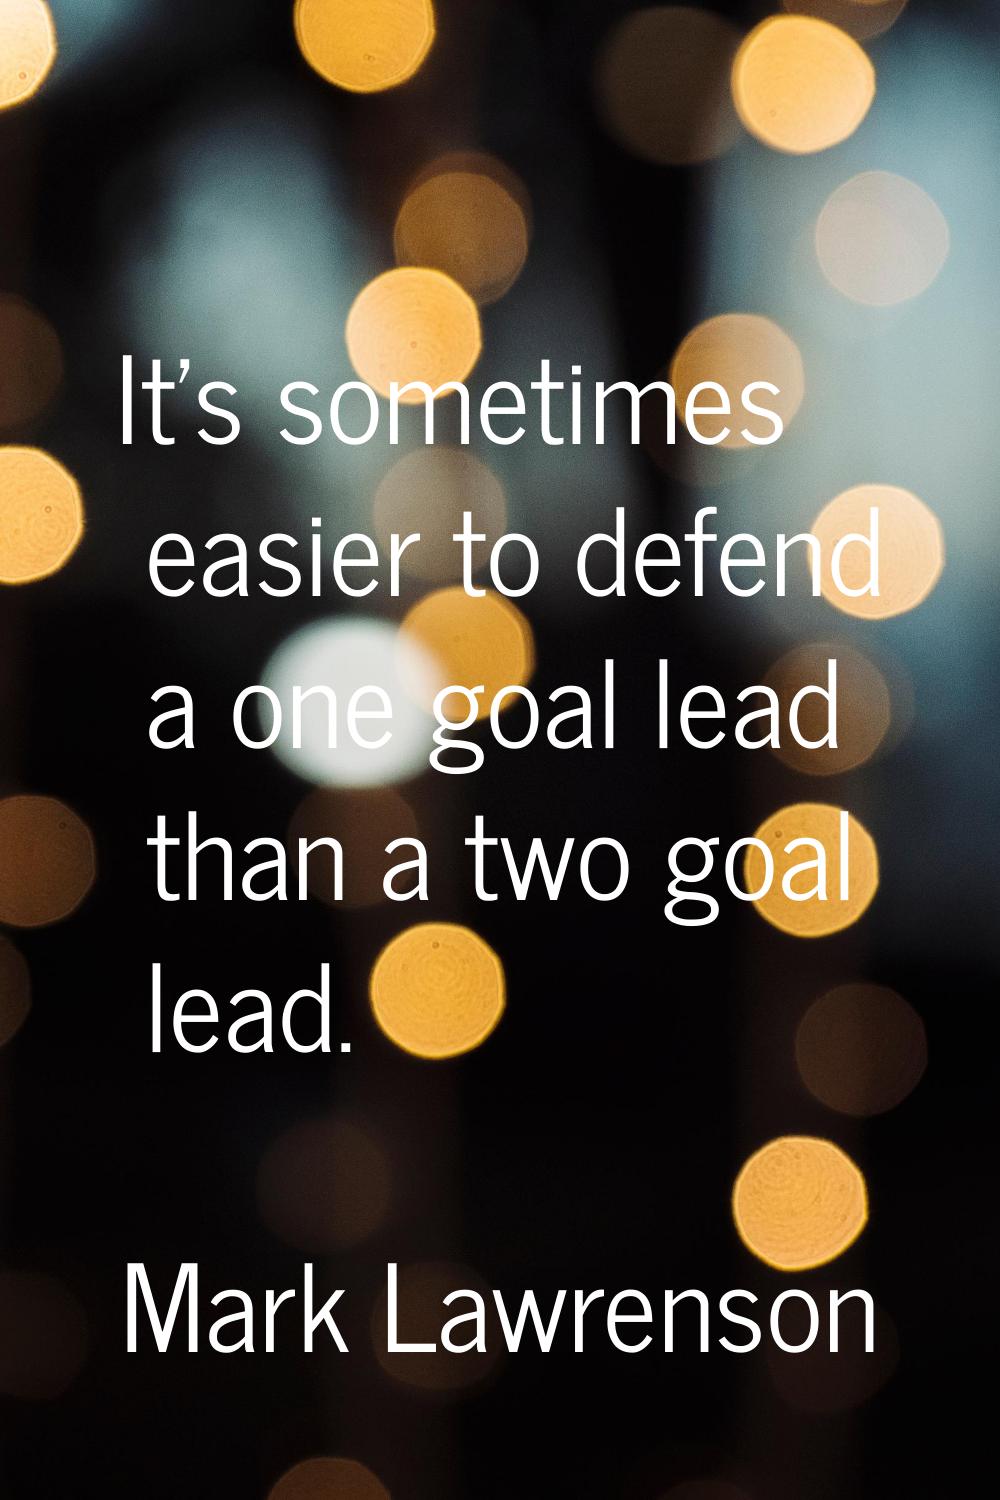 It's sometimes easier to defend a one goal lead than a two goal lead.